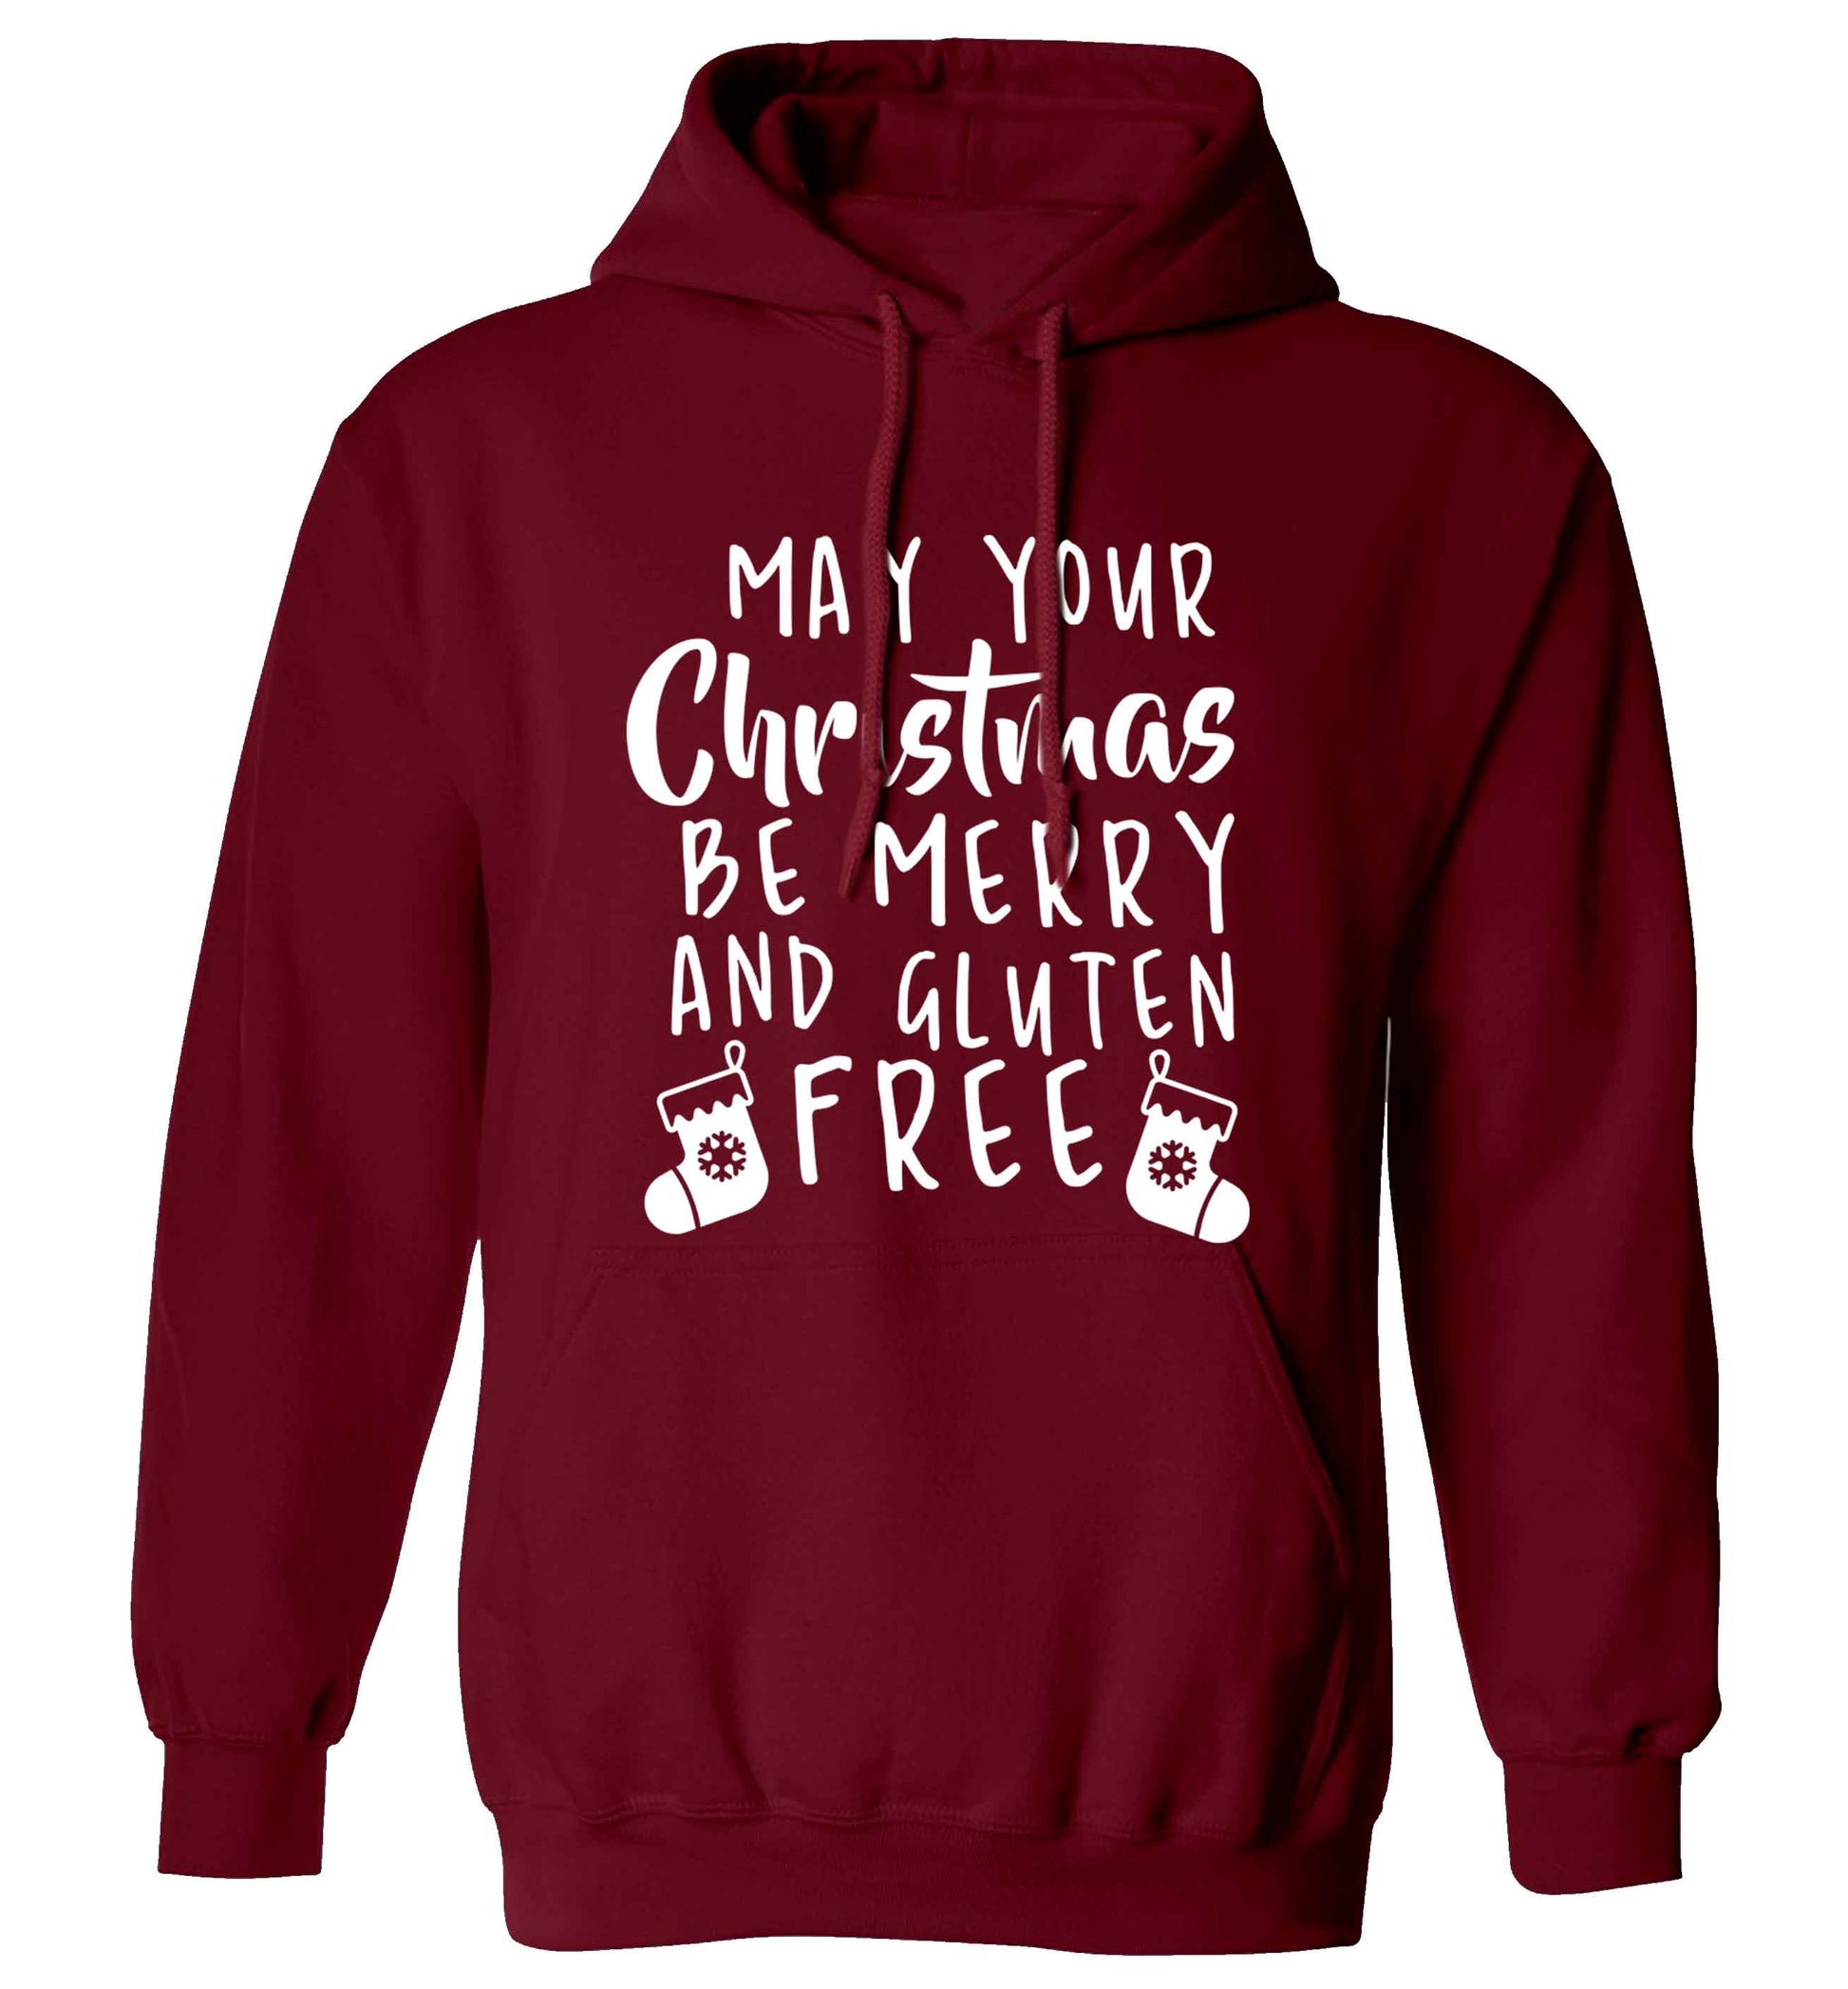 May your Christmas be merry and gluten free adults unisex maroon hoodie 2XL